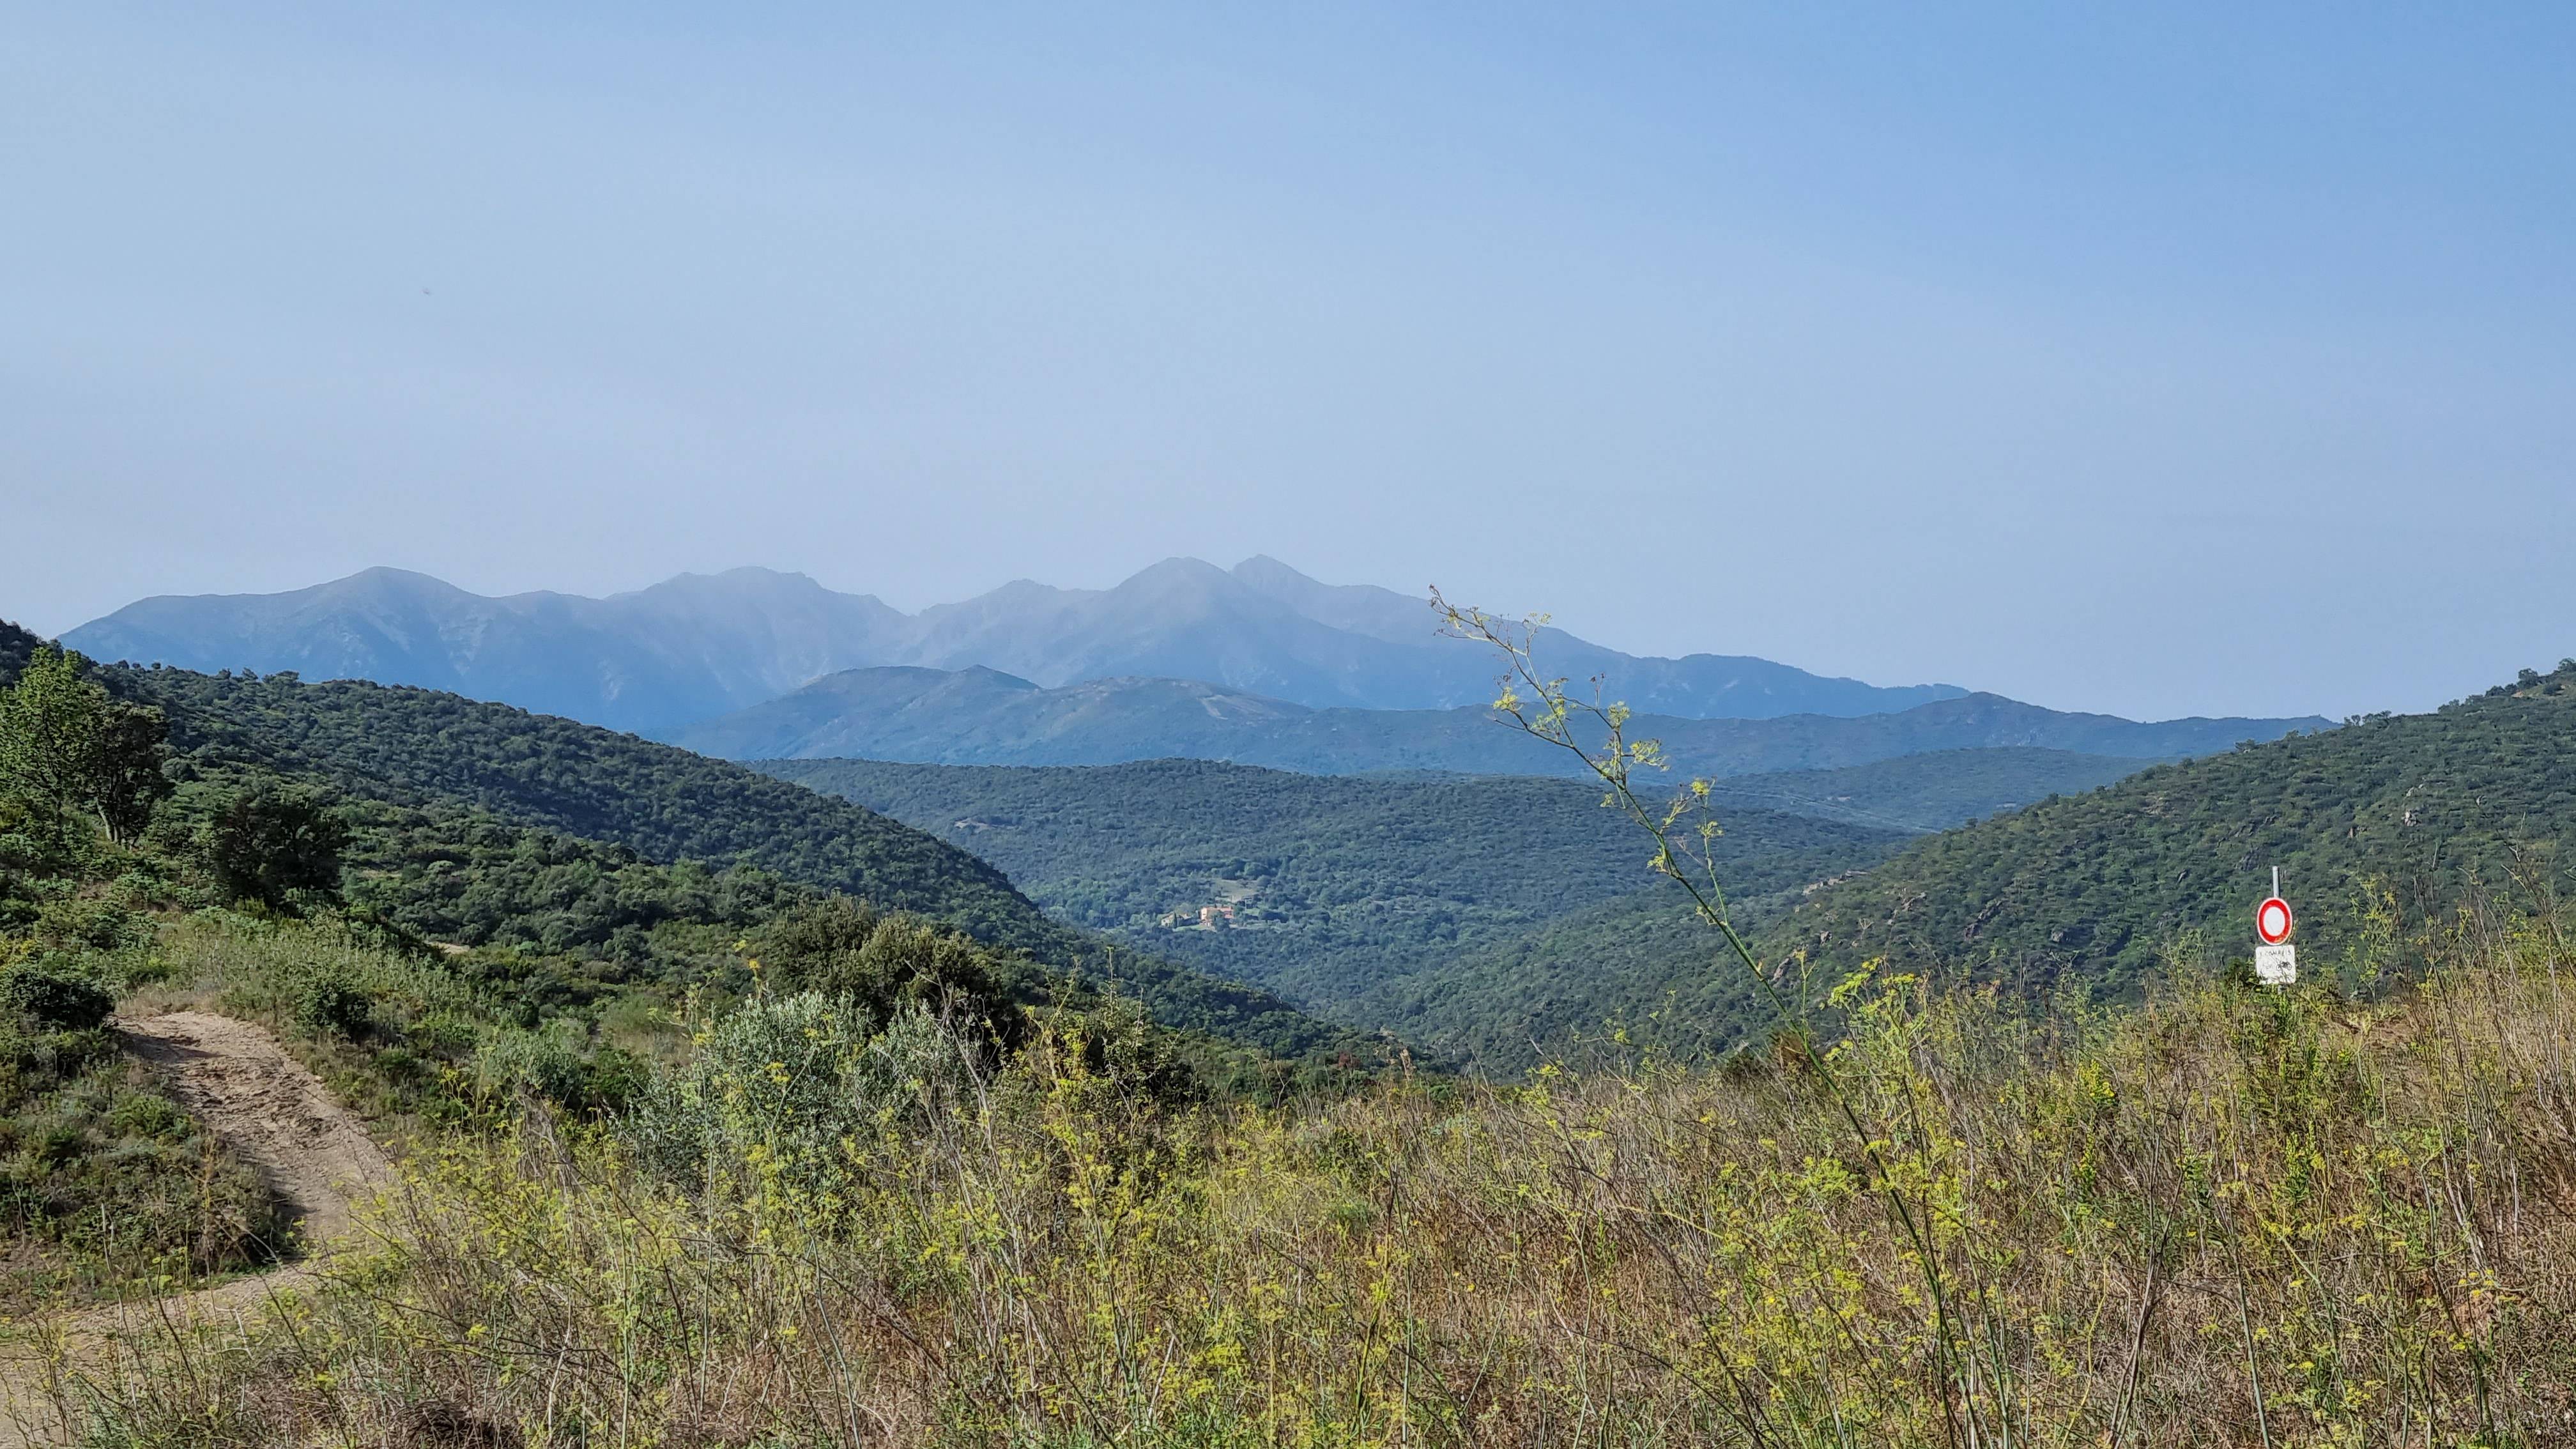 Picture from Area related to Puig de Boc, Puig Tallat, Céret - Prades shoot by Romano Serra